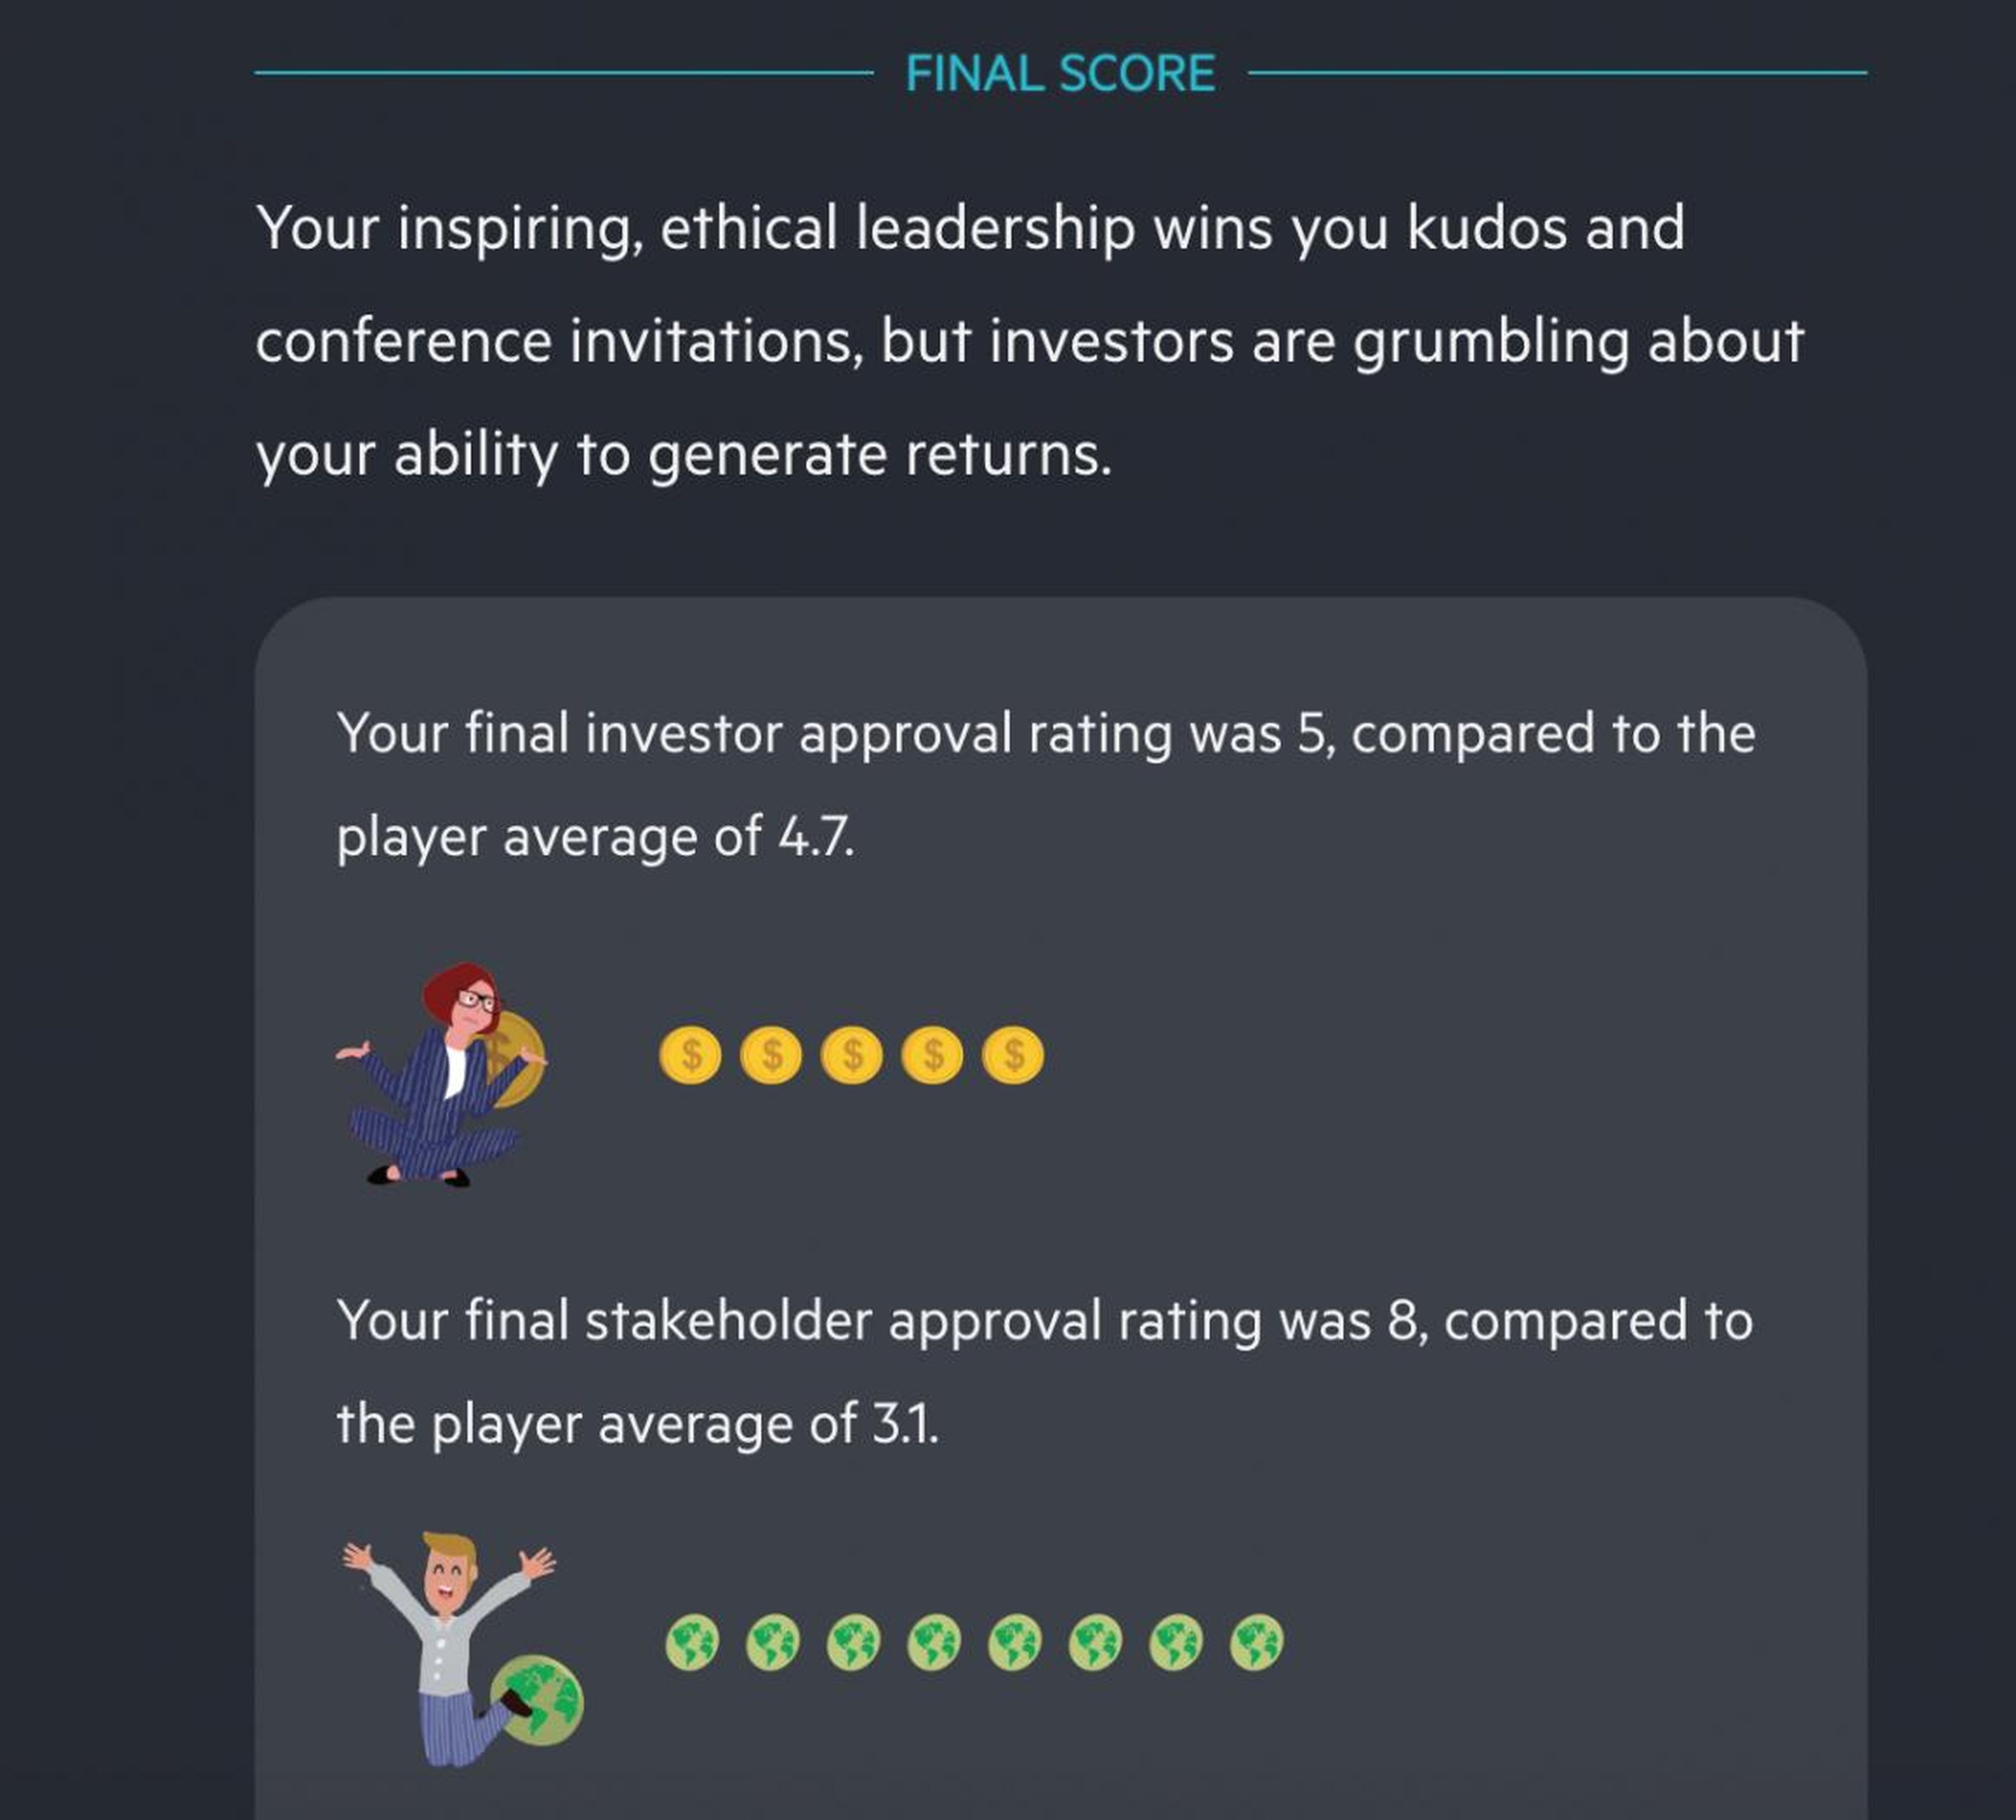 I think I won. Investors aren't thrilled with me, but I ended with slightly higher than average investor approval, and more than double average stakeholder approval.